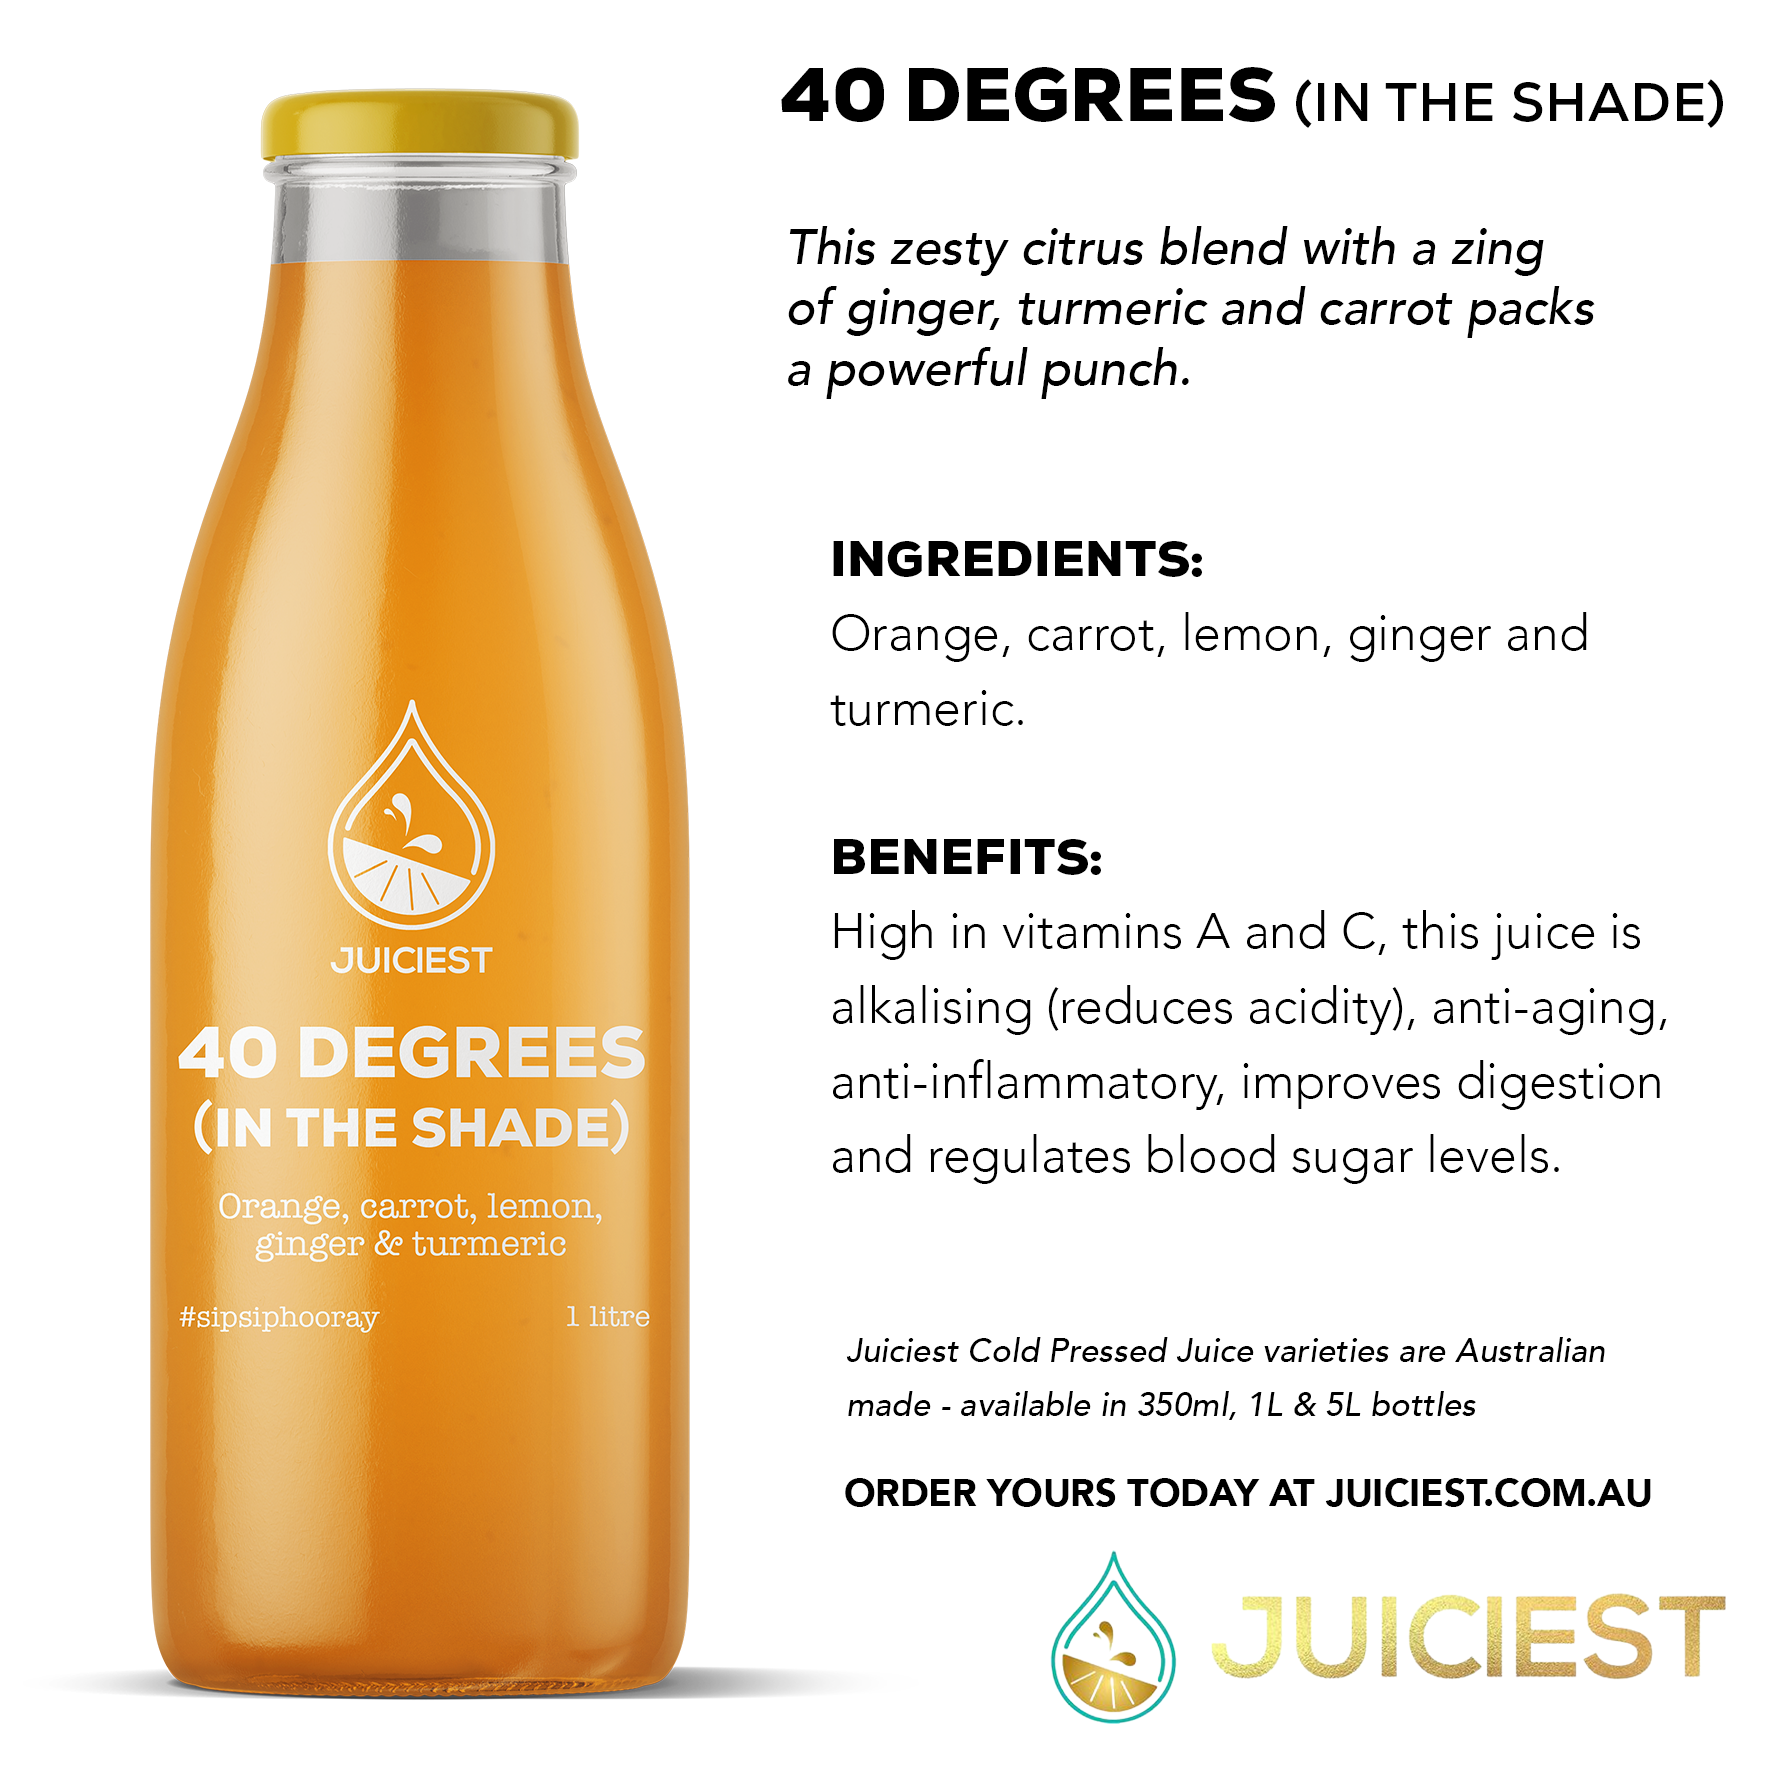 Juiciest 40 Degrees (in the shade) Infographic